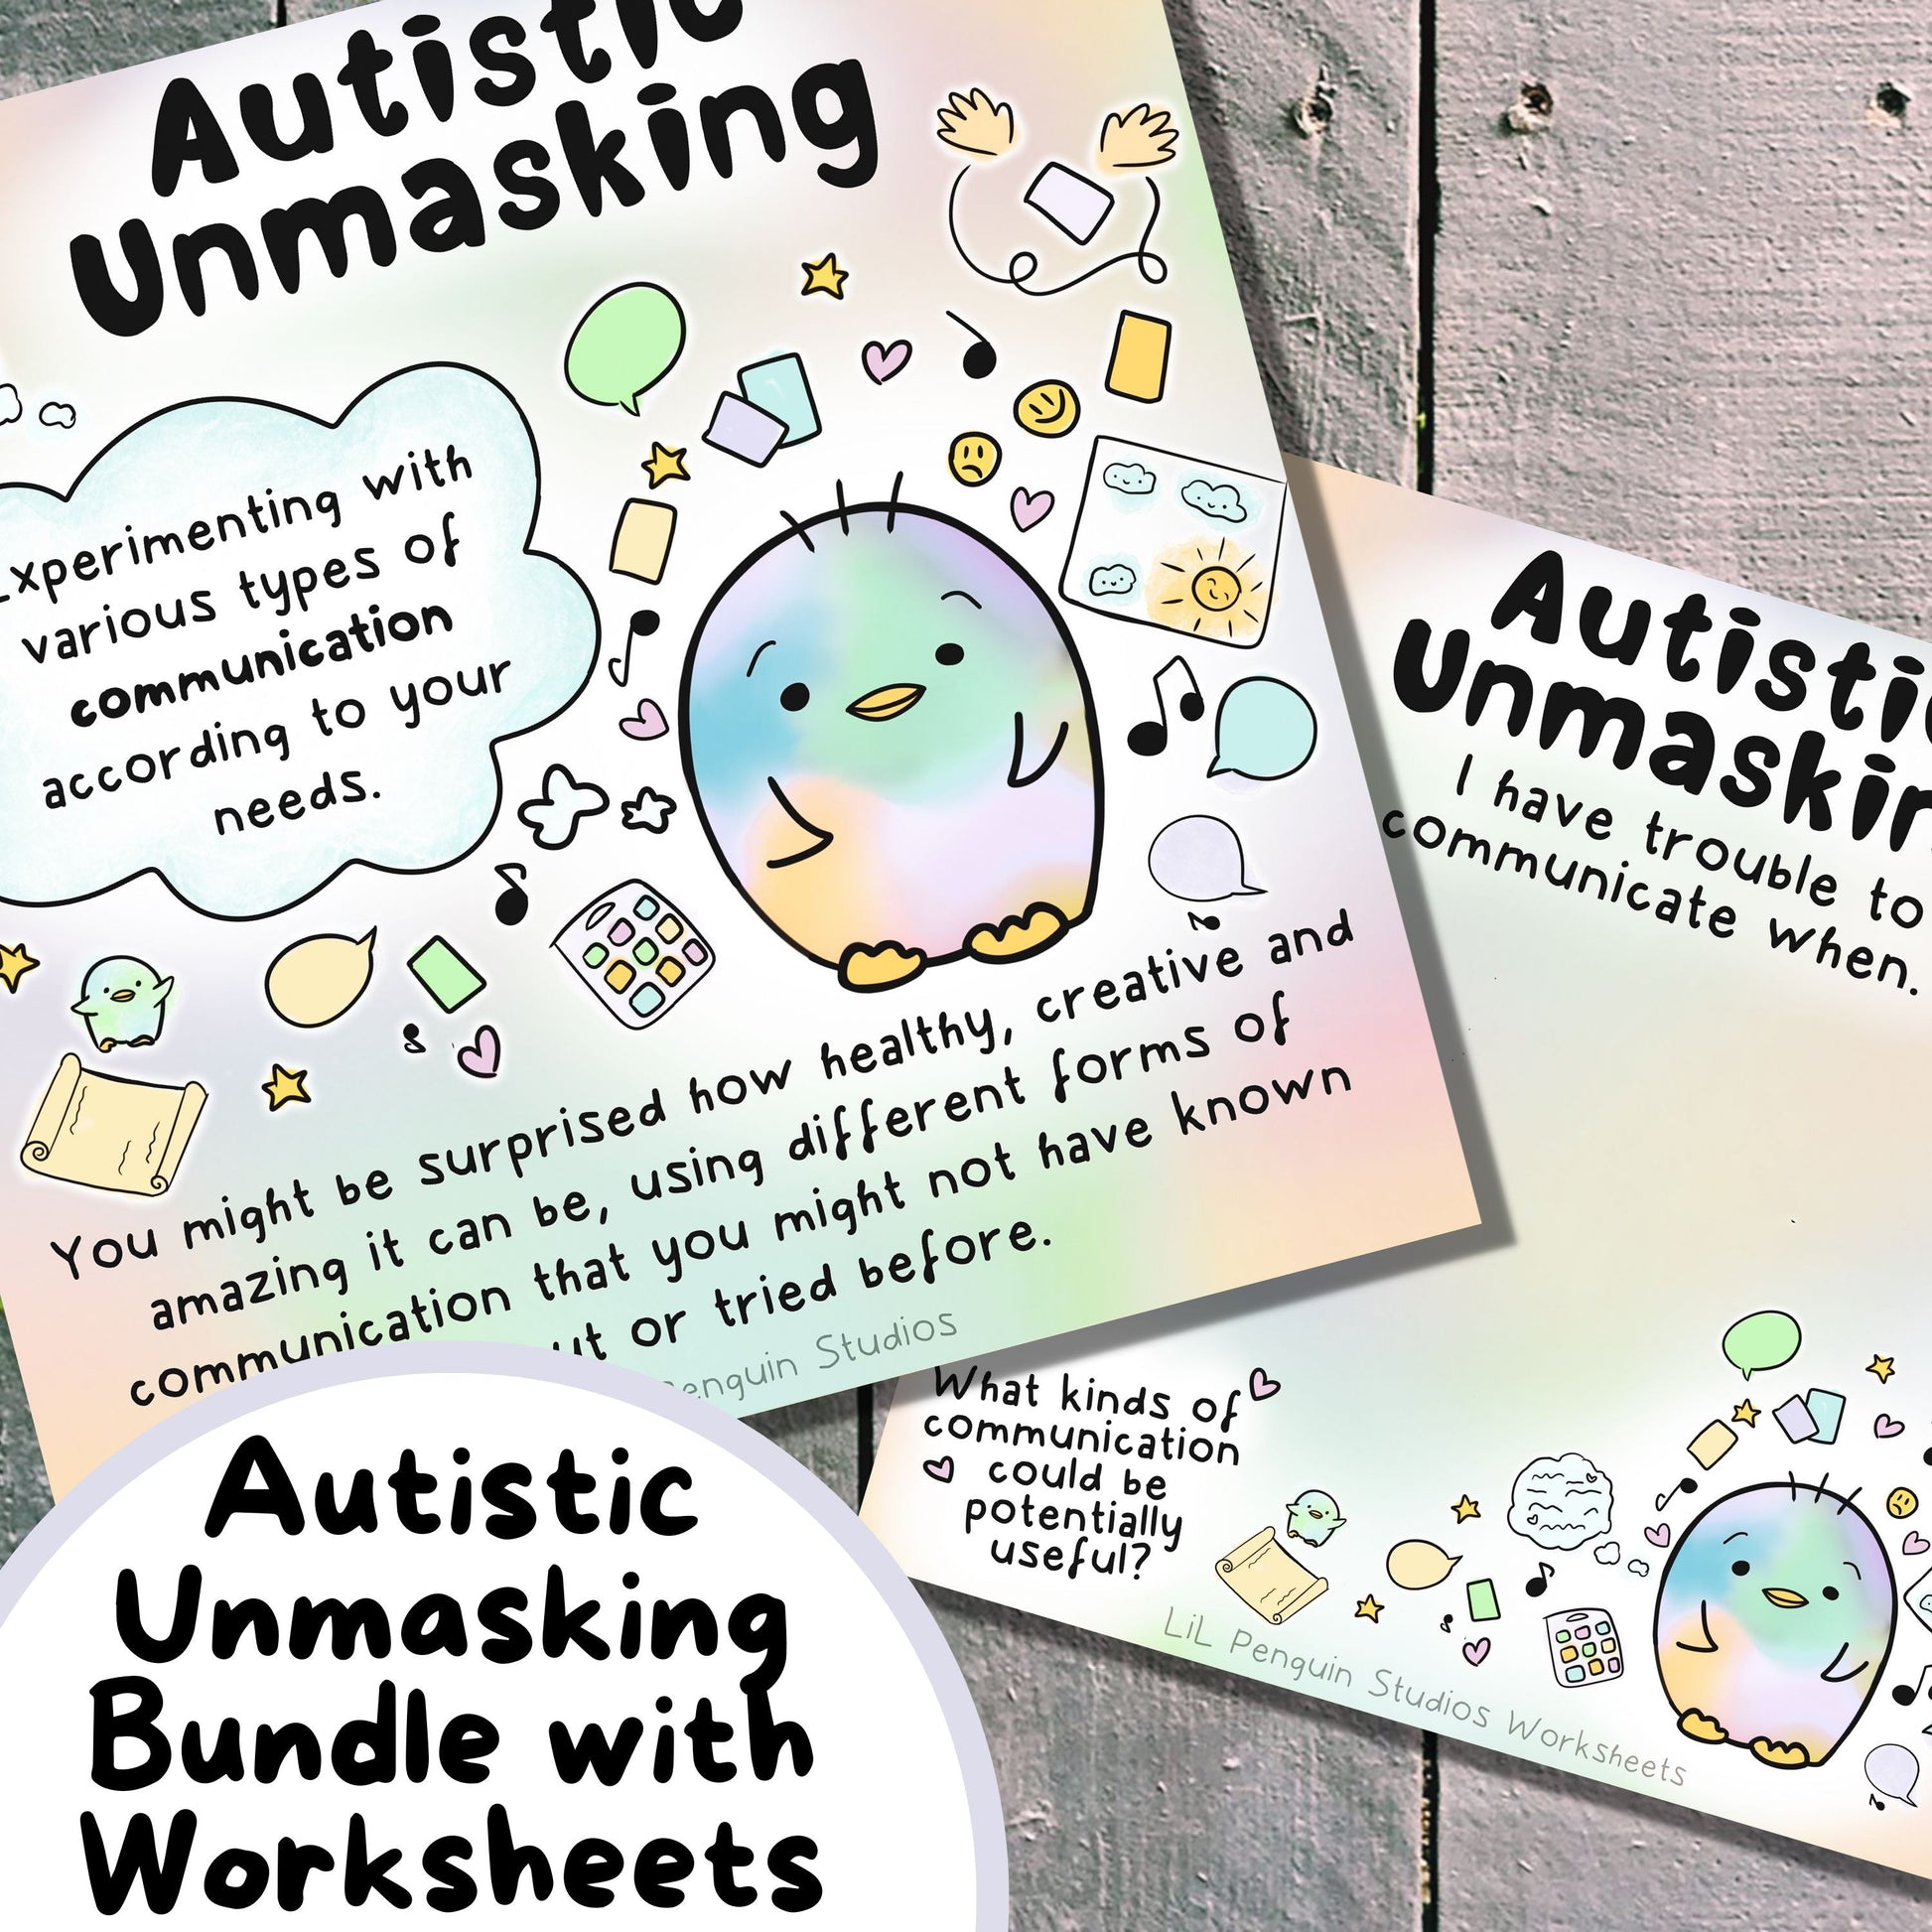 Autistic Unmasking Bundle with private practice licence. This bundle includes 6 Worksheets, a poster and 6 further art prints.